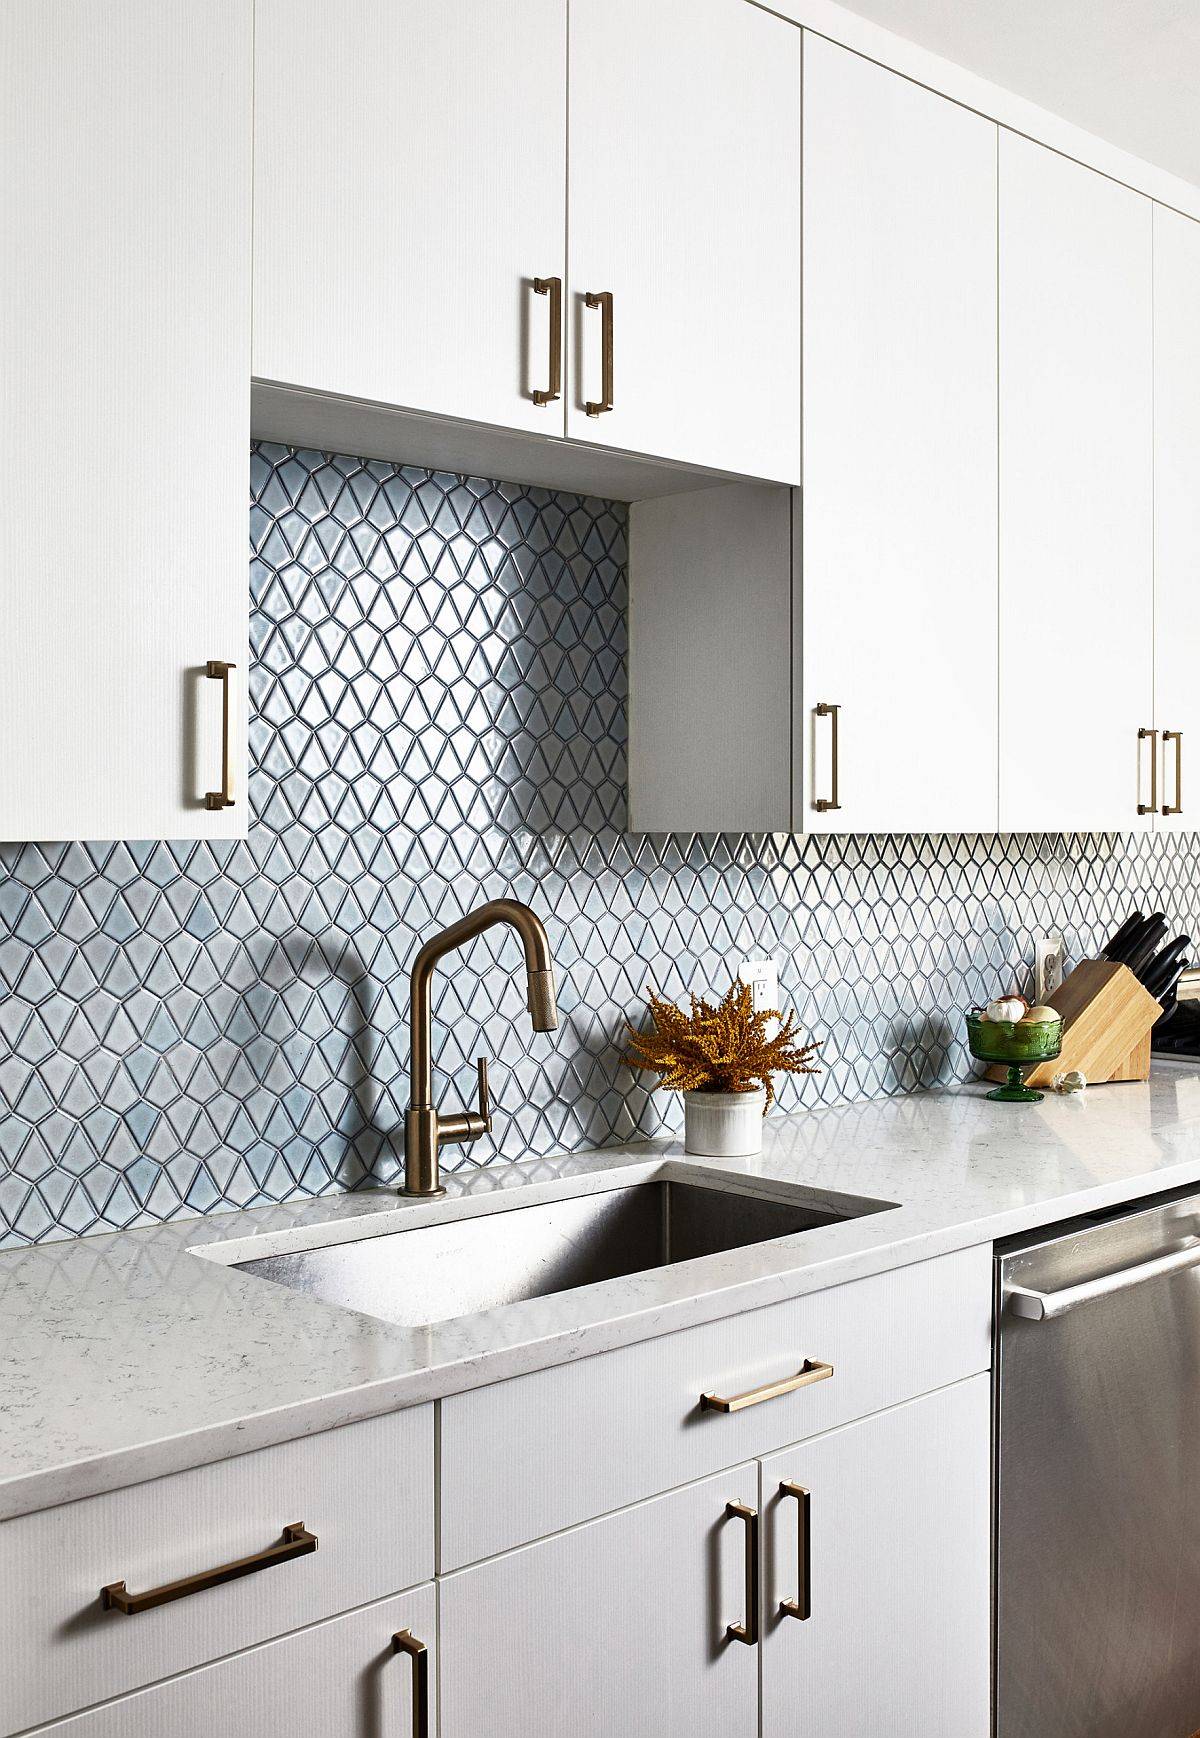 Kitchen in blue and white with stainless steel sink and quartz countertops